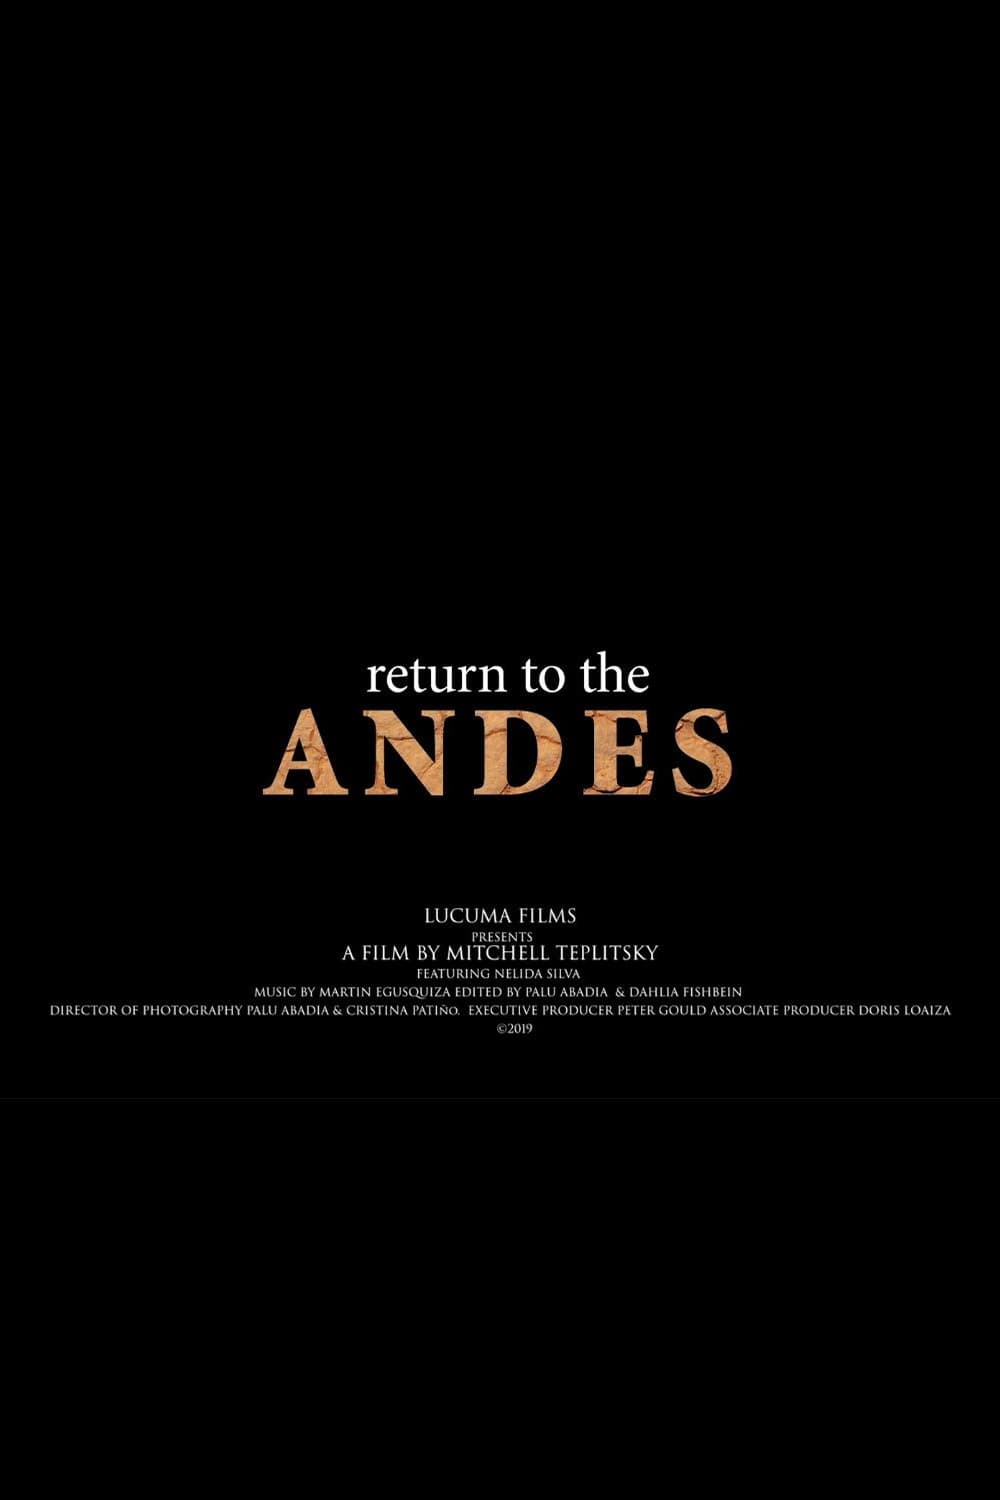 Return to the Andes